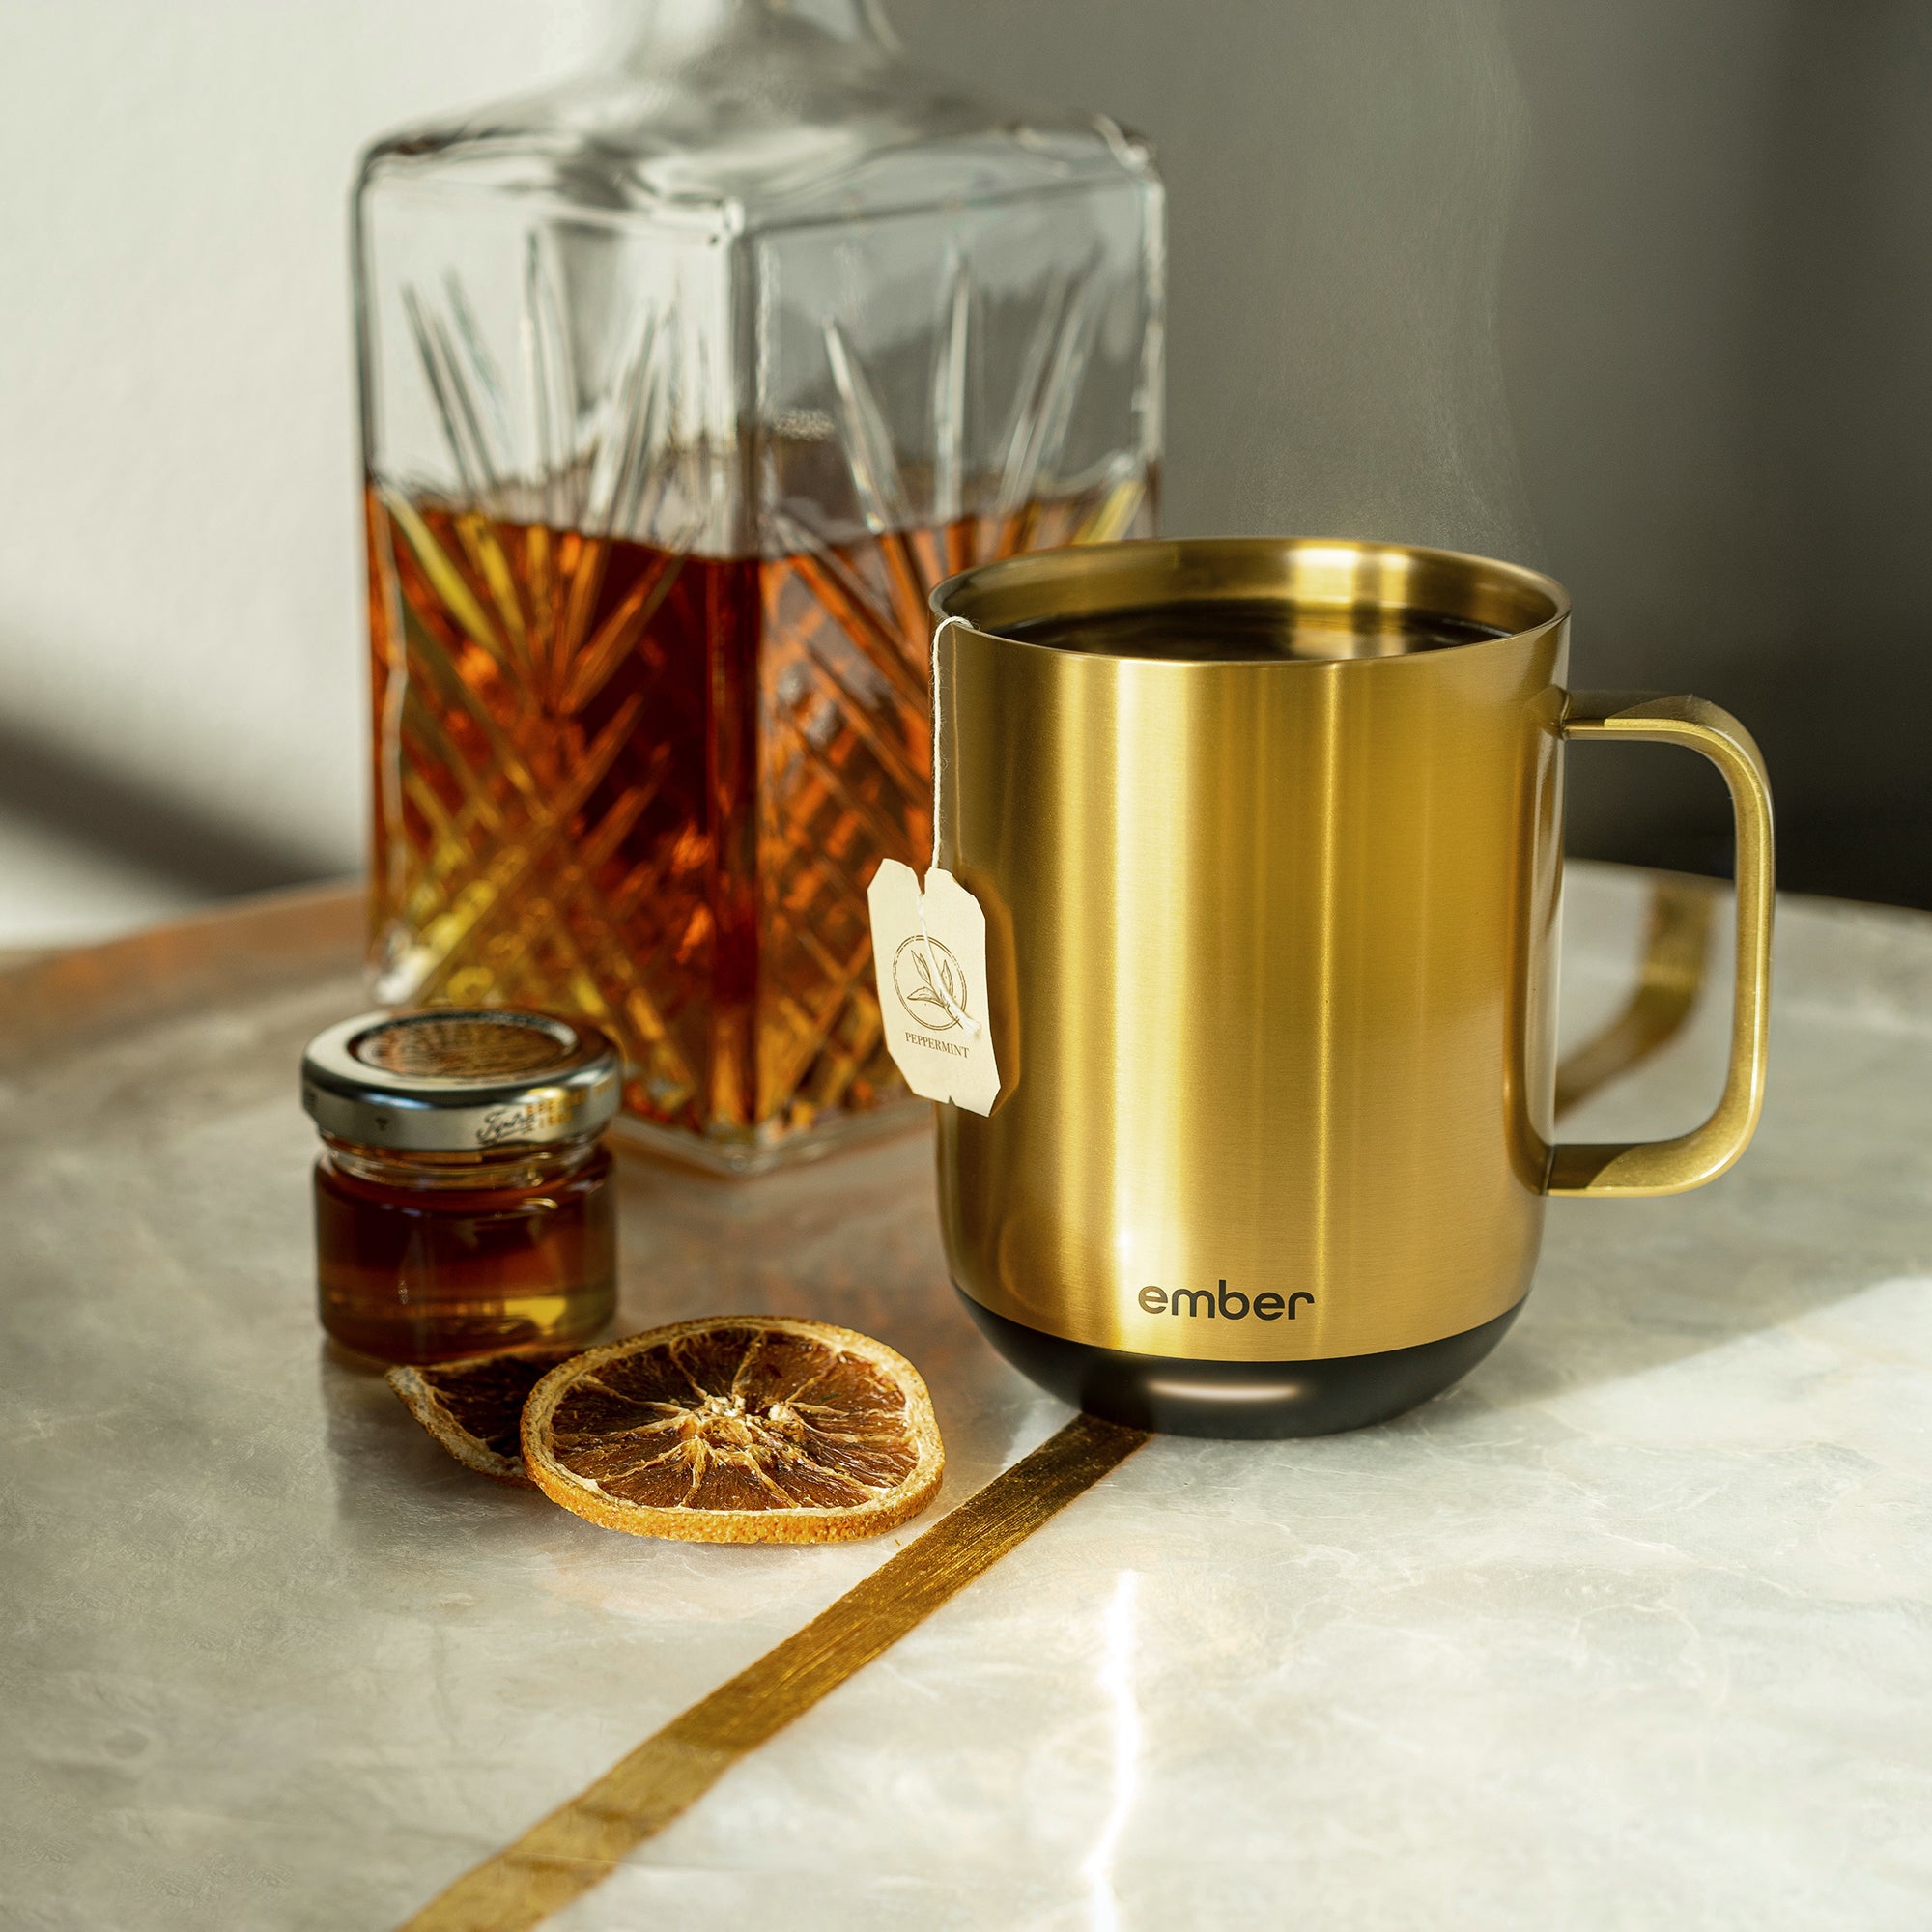 A Gold Ember Mug² filled with black tea sits on a marble and gold table next to a small jar of honey, slices of candied oranges, and a crystal carafe of a brown liquor.